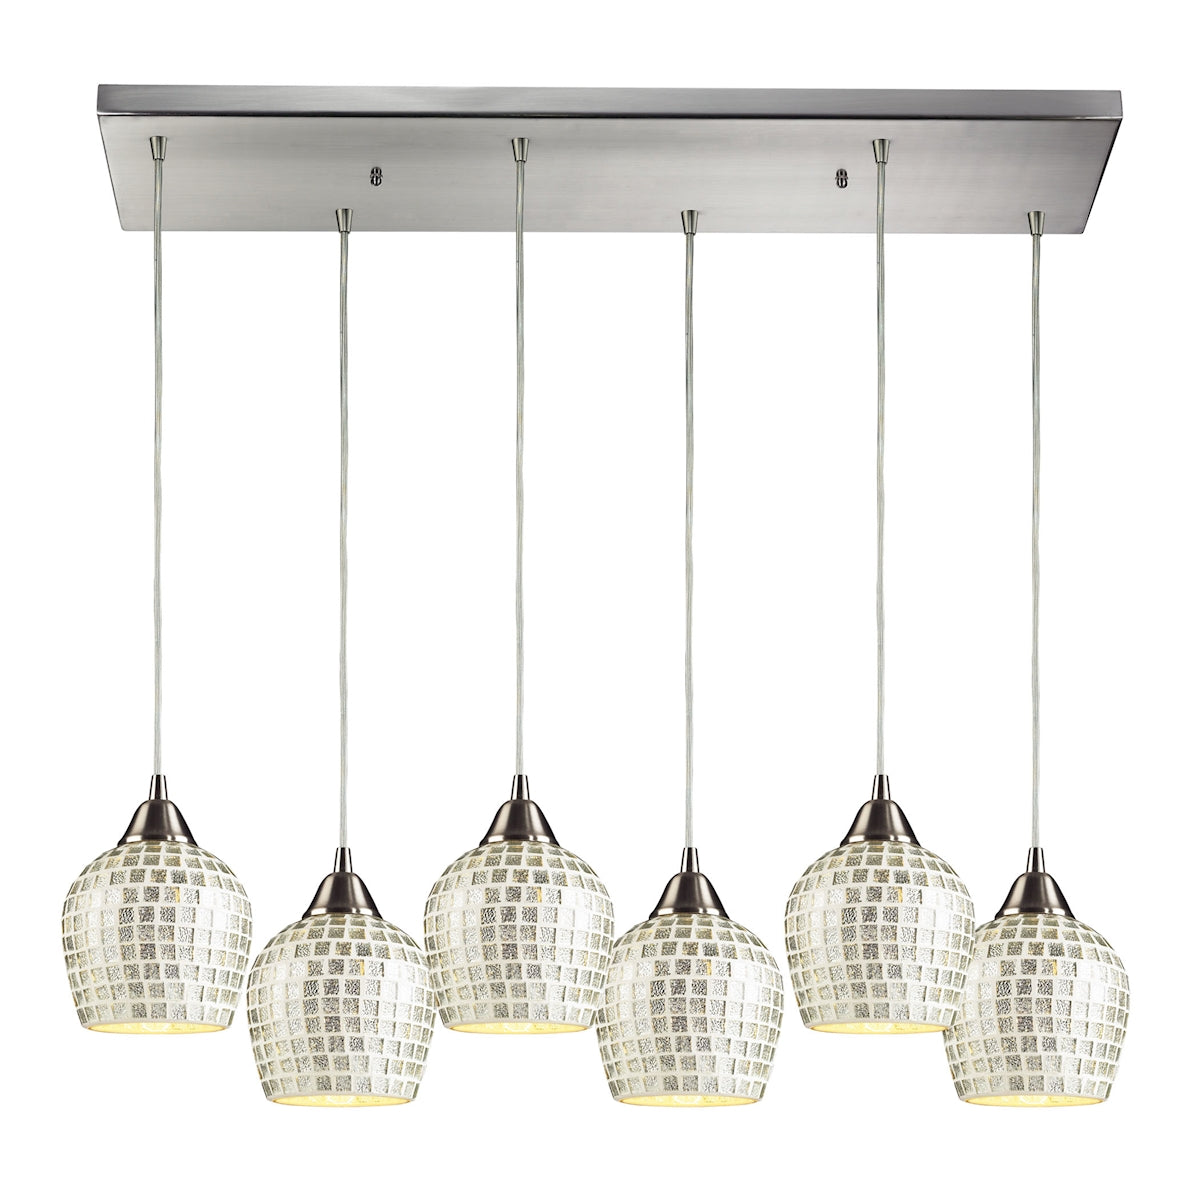 Fusion 6-Light Rectangular Pendant Fixture in Satin Nickel with Silver Mosaic Glass